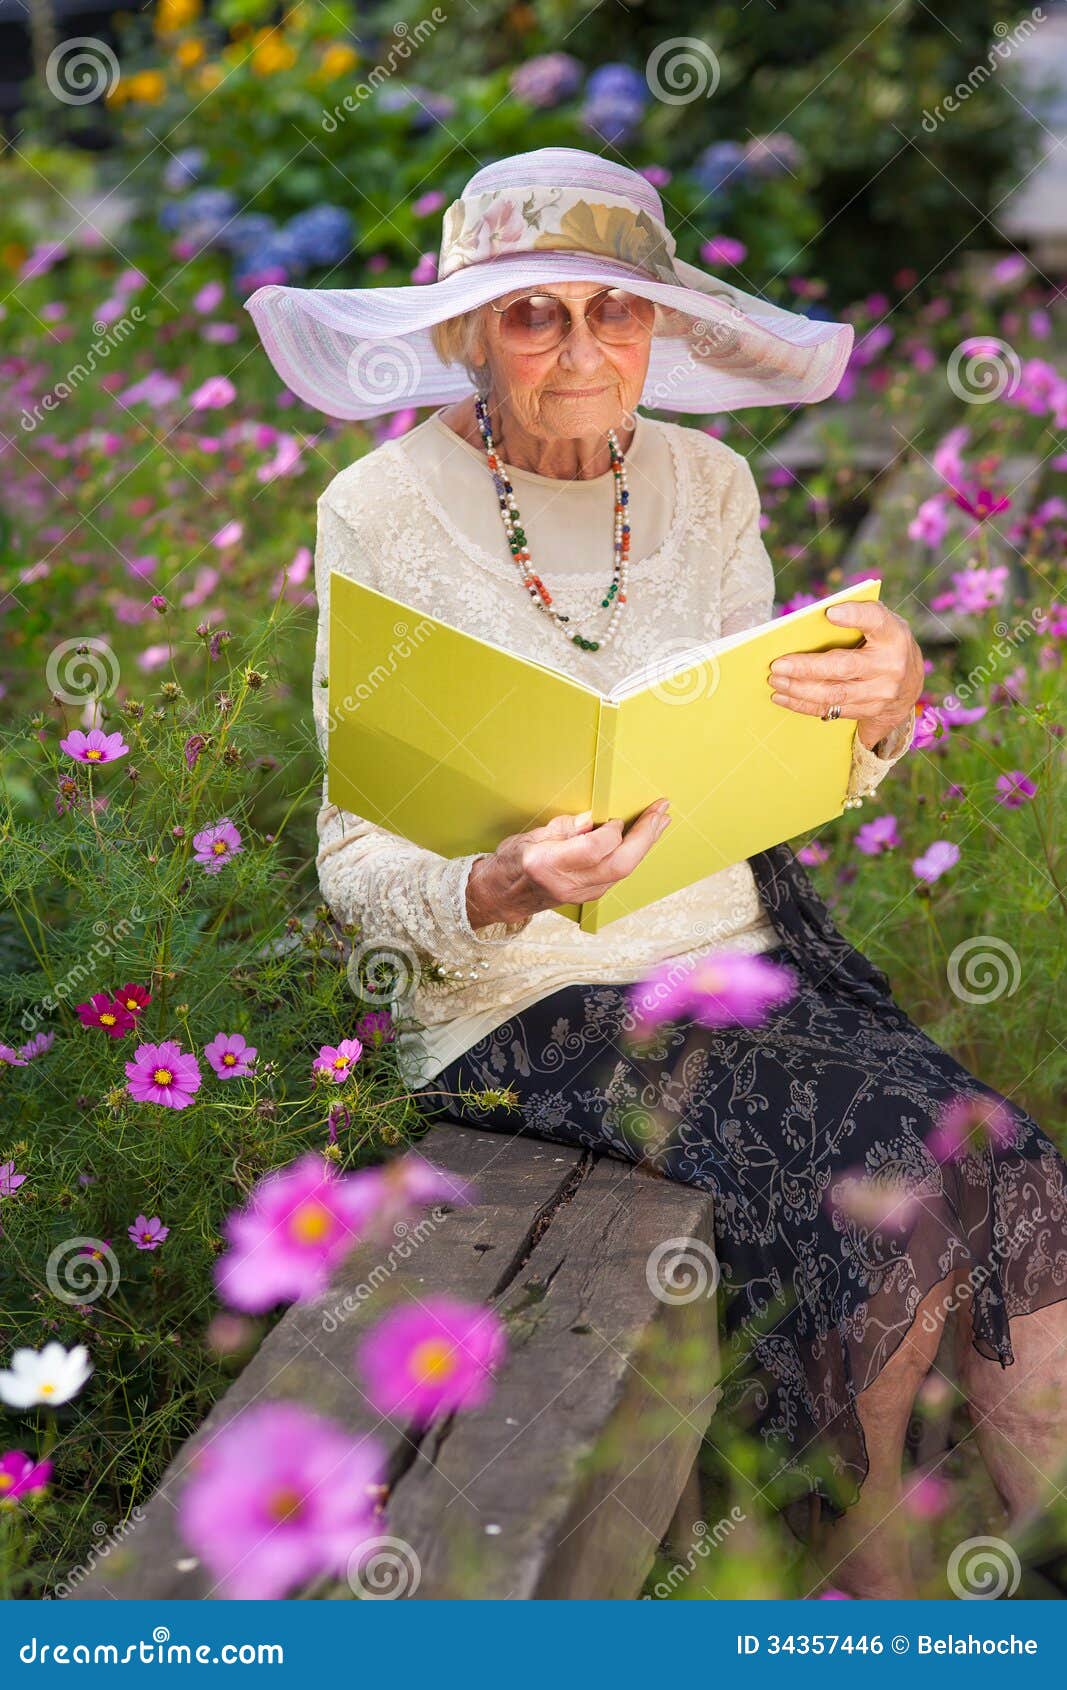 Fashionable Old Lady Reading In Her Garden Stock Photo 